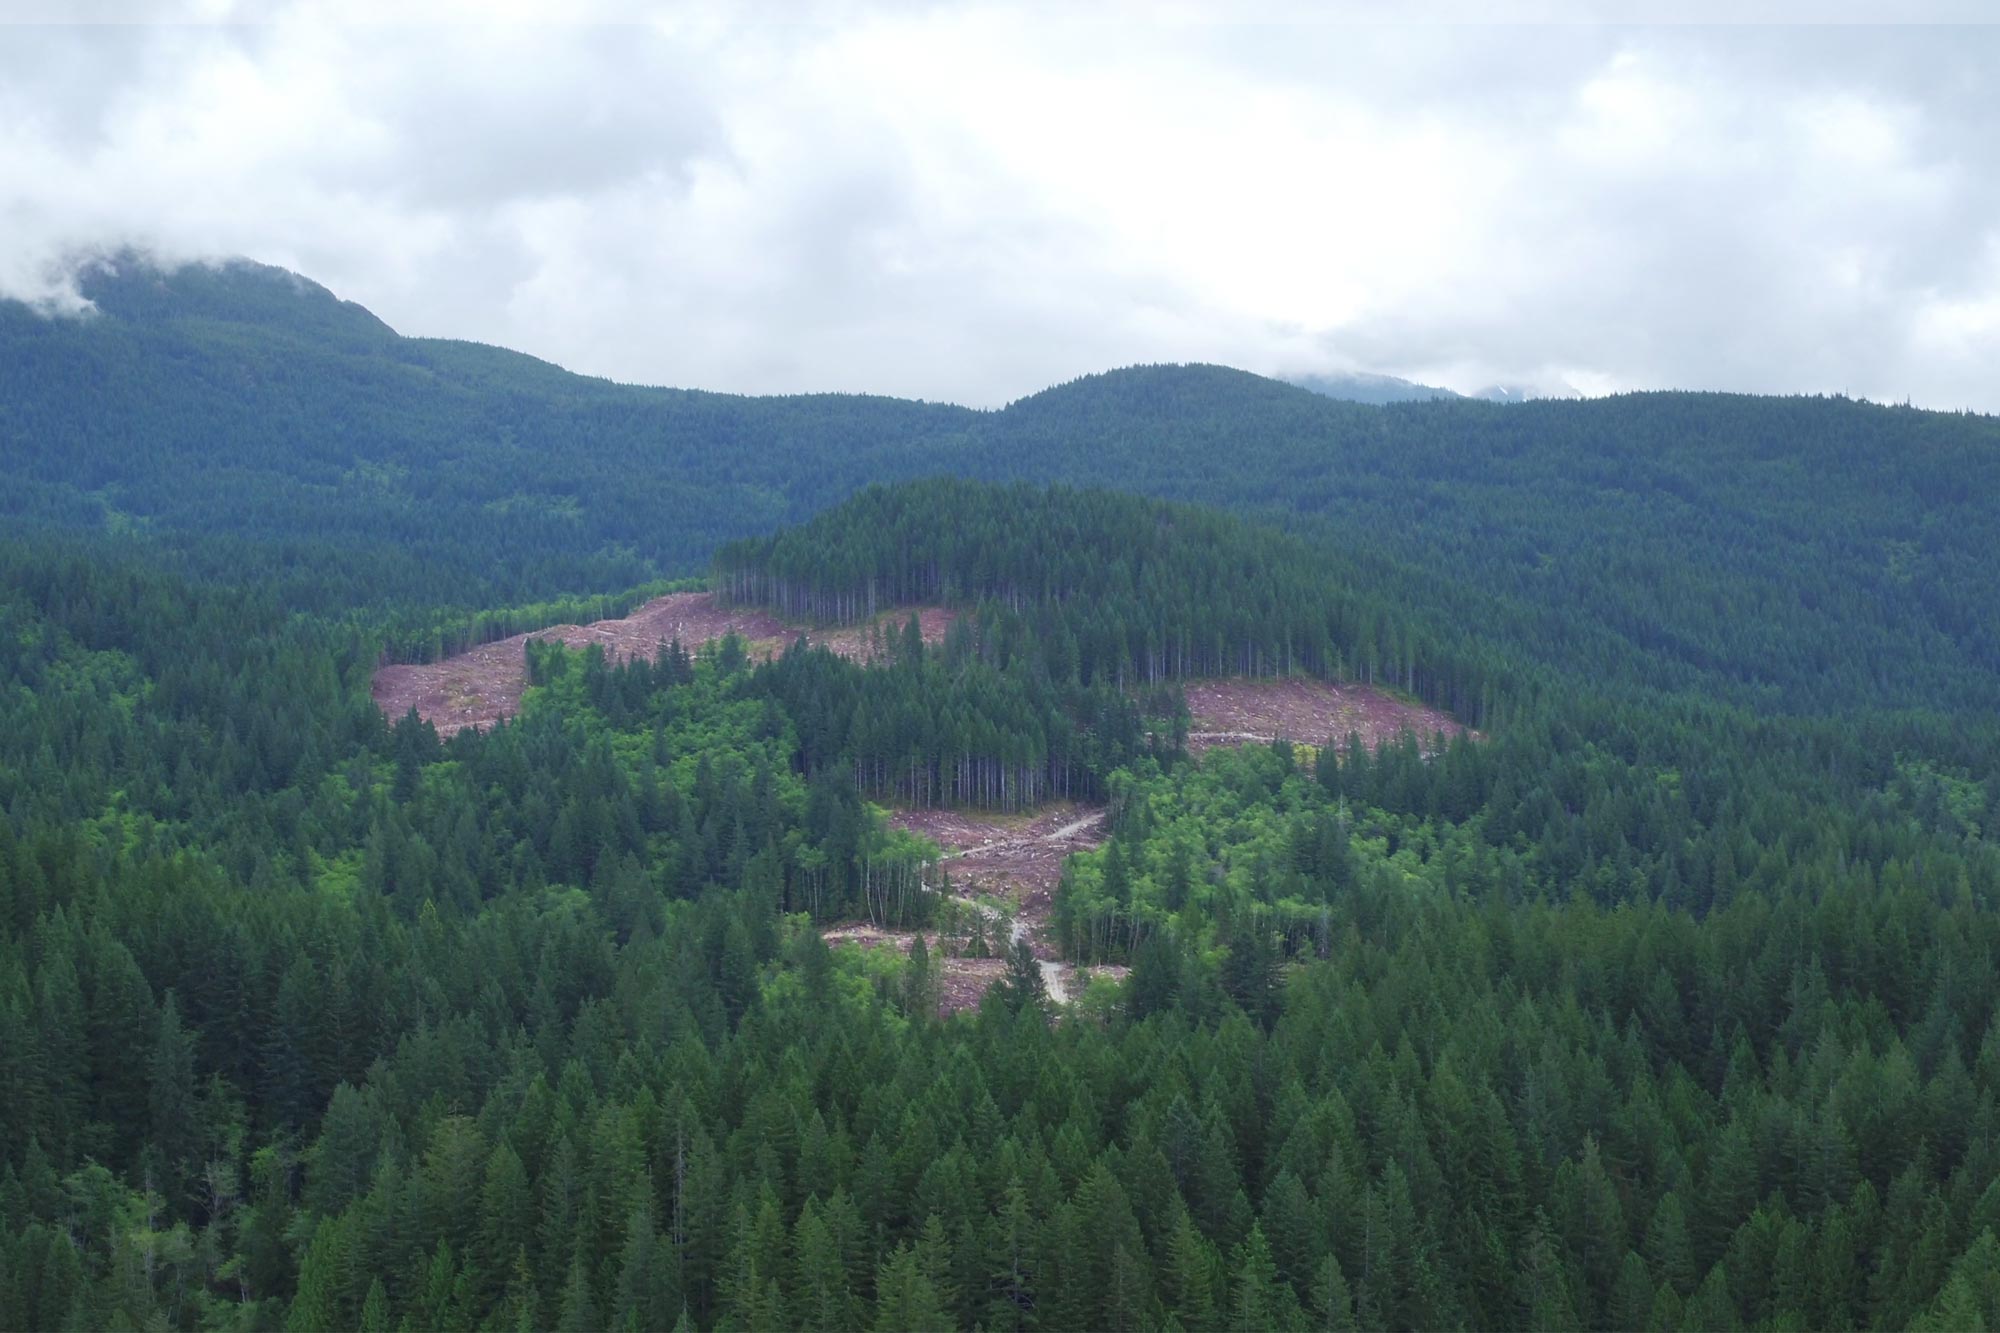 How Western Forest Products is Mitigating Climate Change Through Responsible Forestry Practices